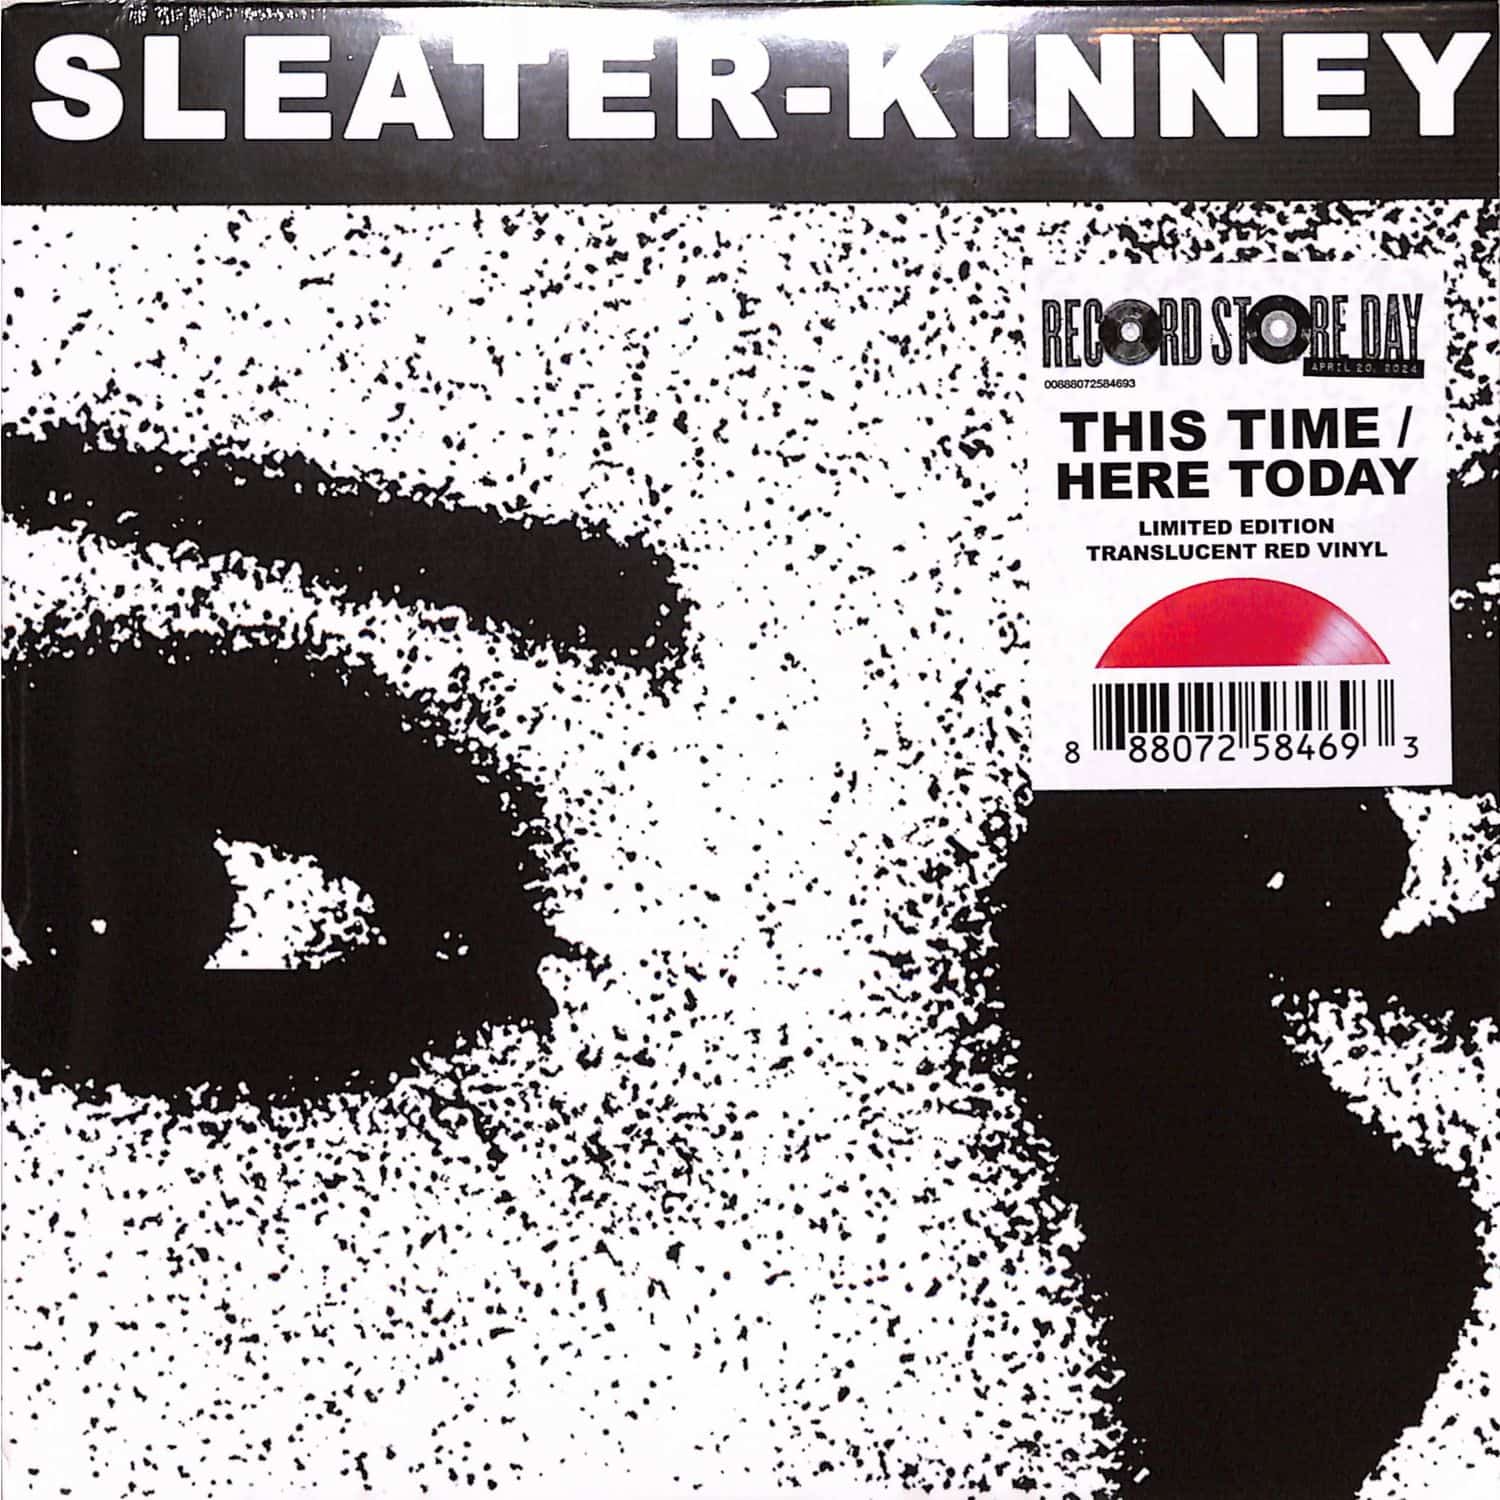 Sleater-Kinney - THIS TIME / HERE TODAY 